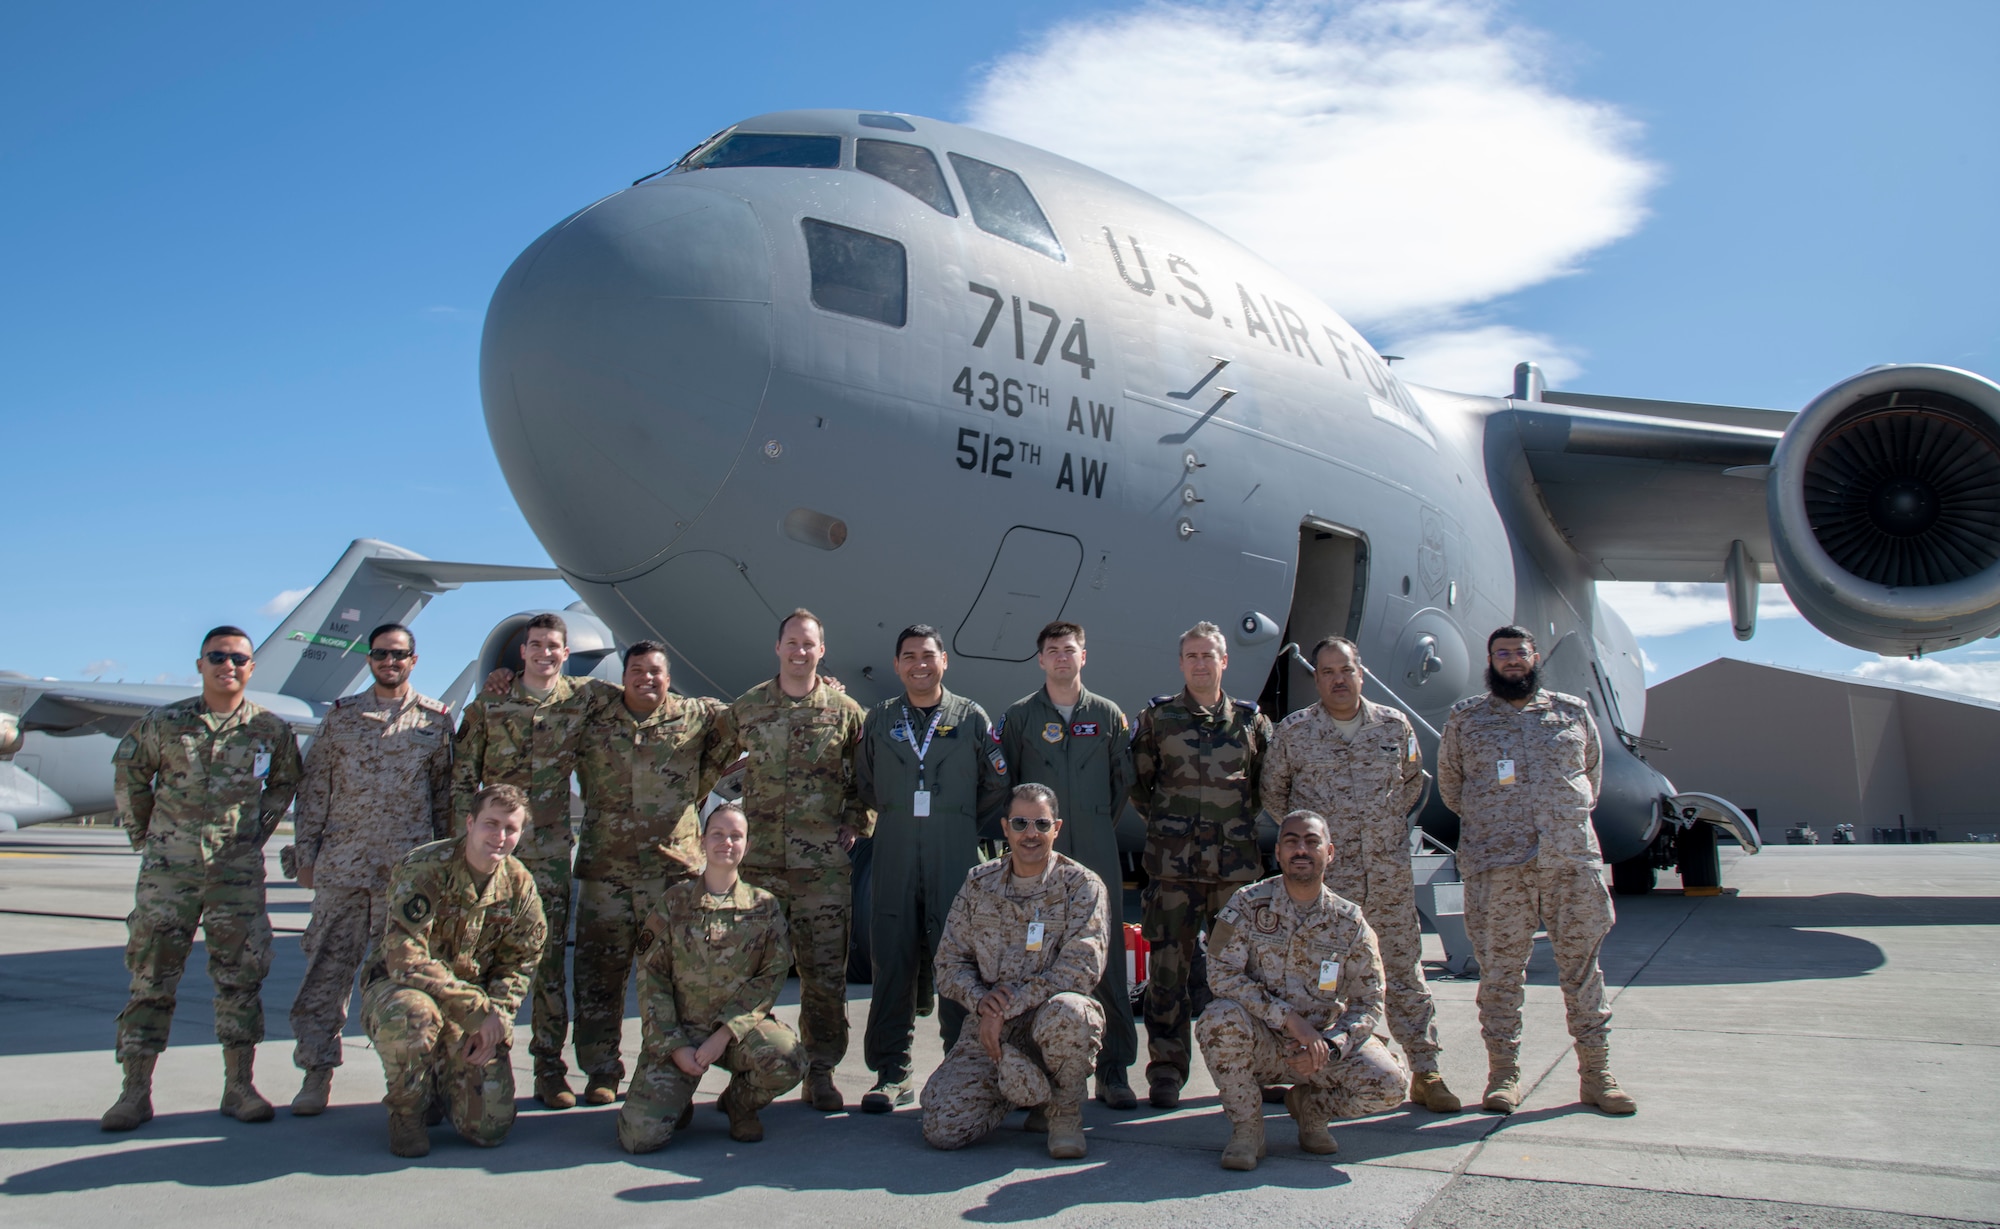 Airmen from the 3rd Airlift Squadron pose for a photo with other exercise participants Sept. 24, 2019, at Fairchild Air Force Base, Wash., during Mobility Guardian 2019. Exercise Mobility Guardian is Air Mobility Command's premier, large-scale mobility exercise. Through robust and relevant training, Mobility Guardian improves the readiness and capabilities of Mobility Airmen to deliver rapid global mobility and builds a more lethal and ready Air Force.(U.S. Air Force video by Tech. Sgt. Esteban Esquivel).